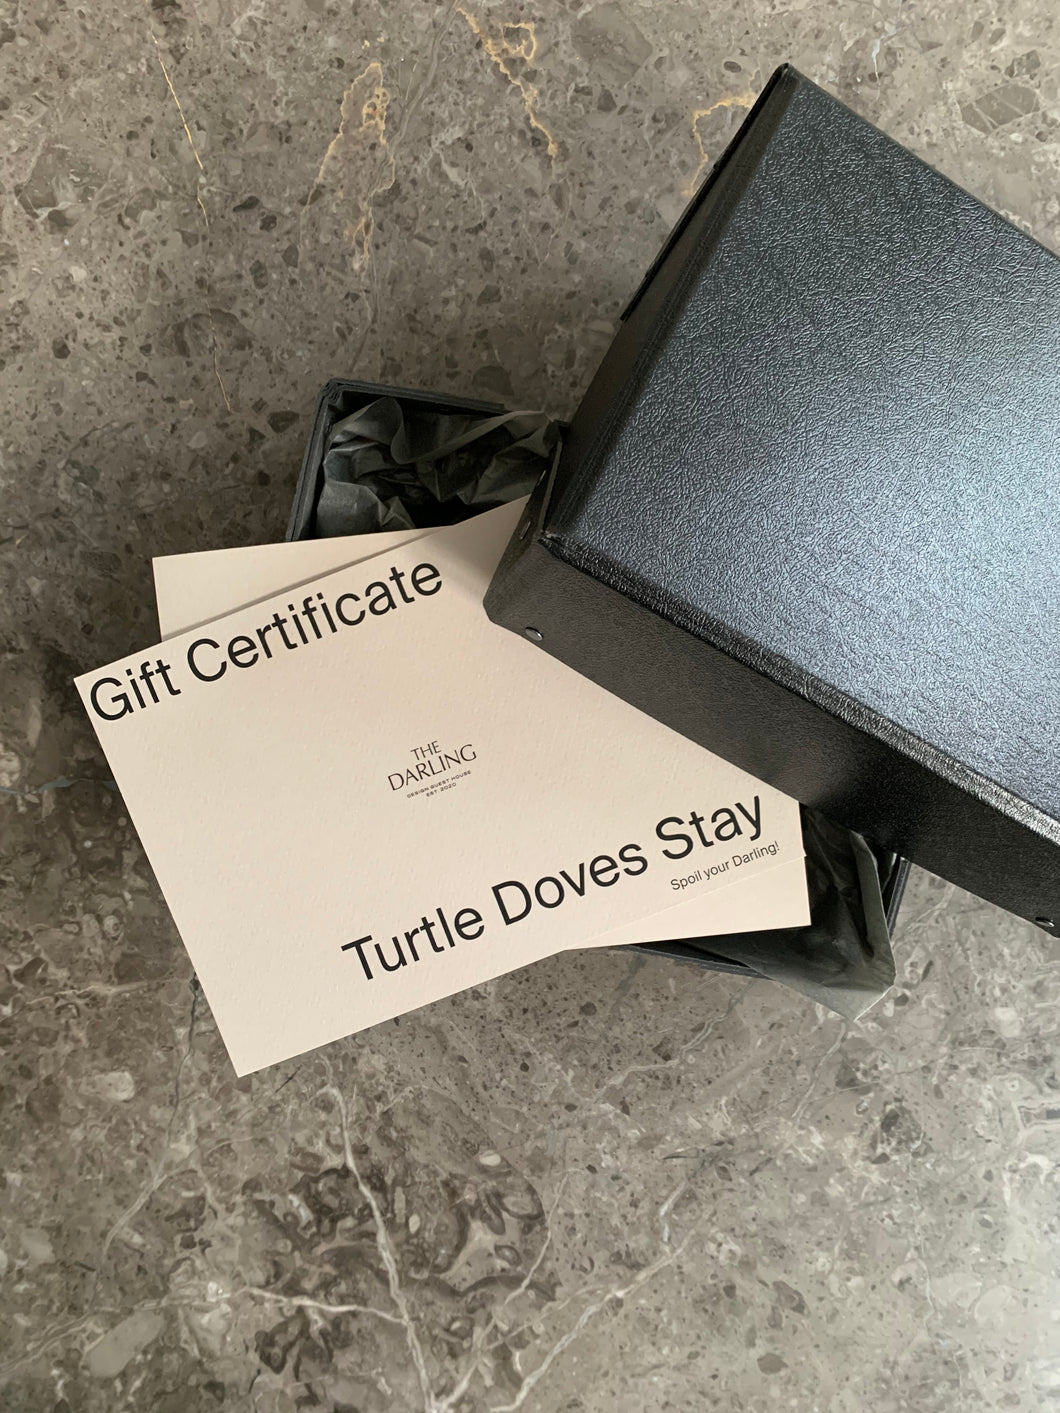 Gift Certificate, Turtle Doves Stay